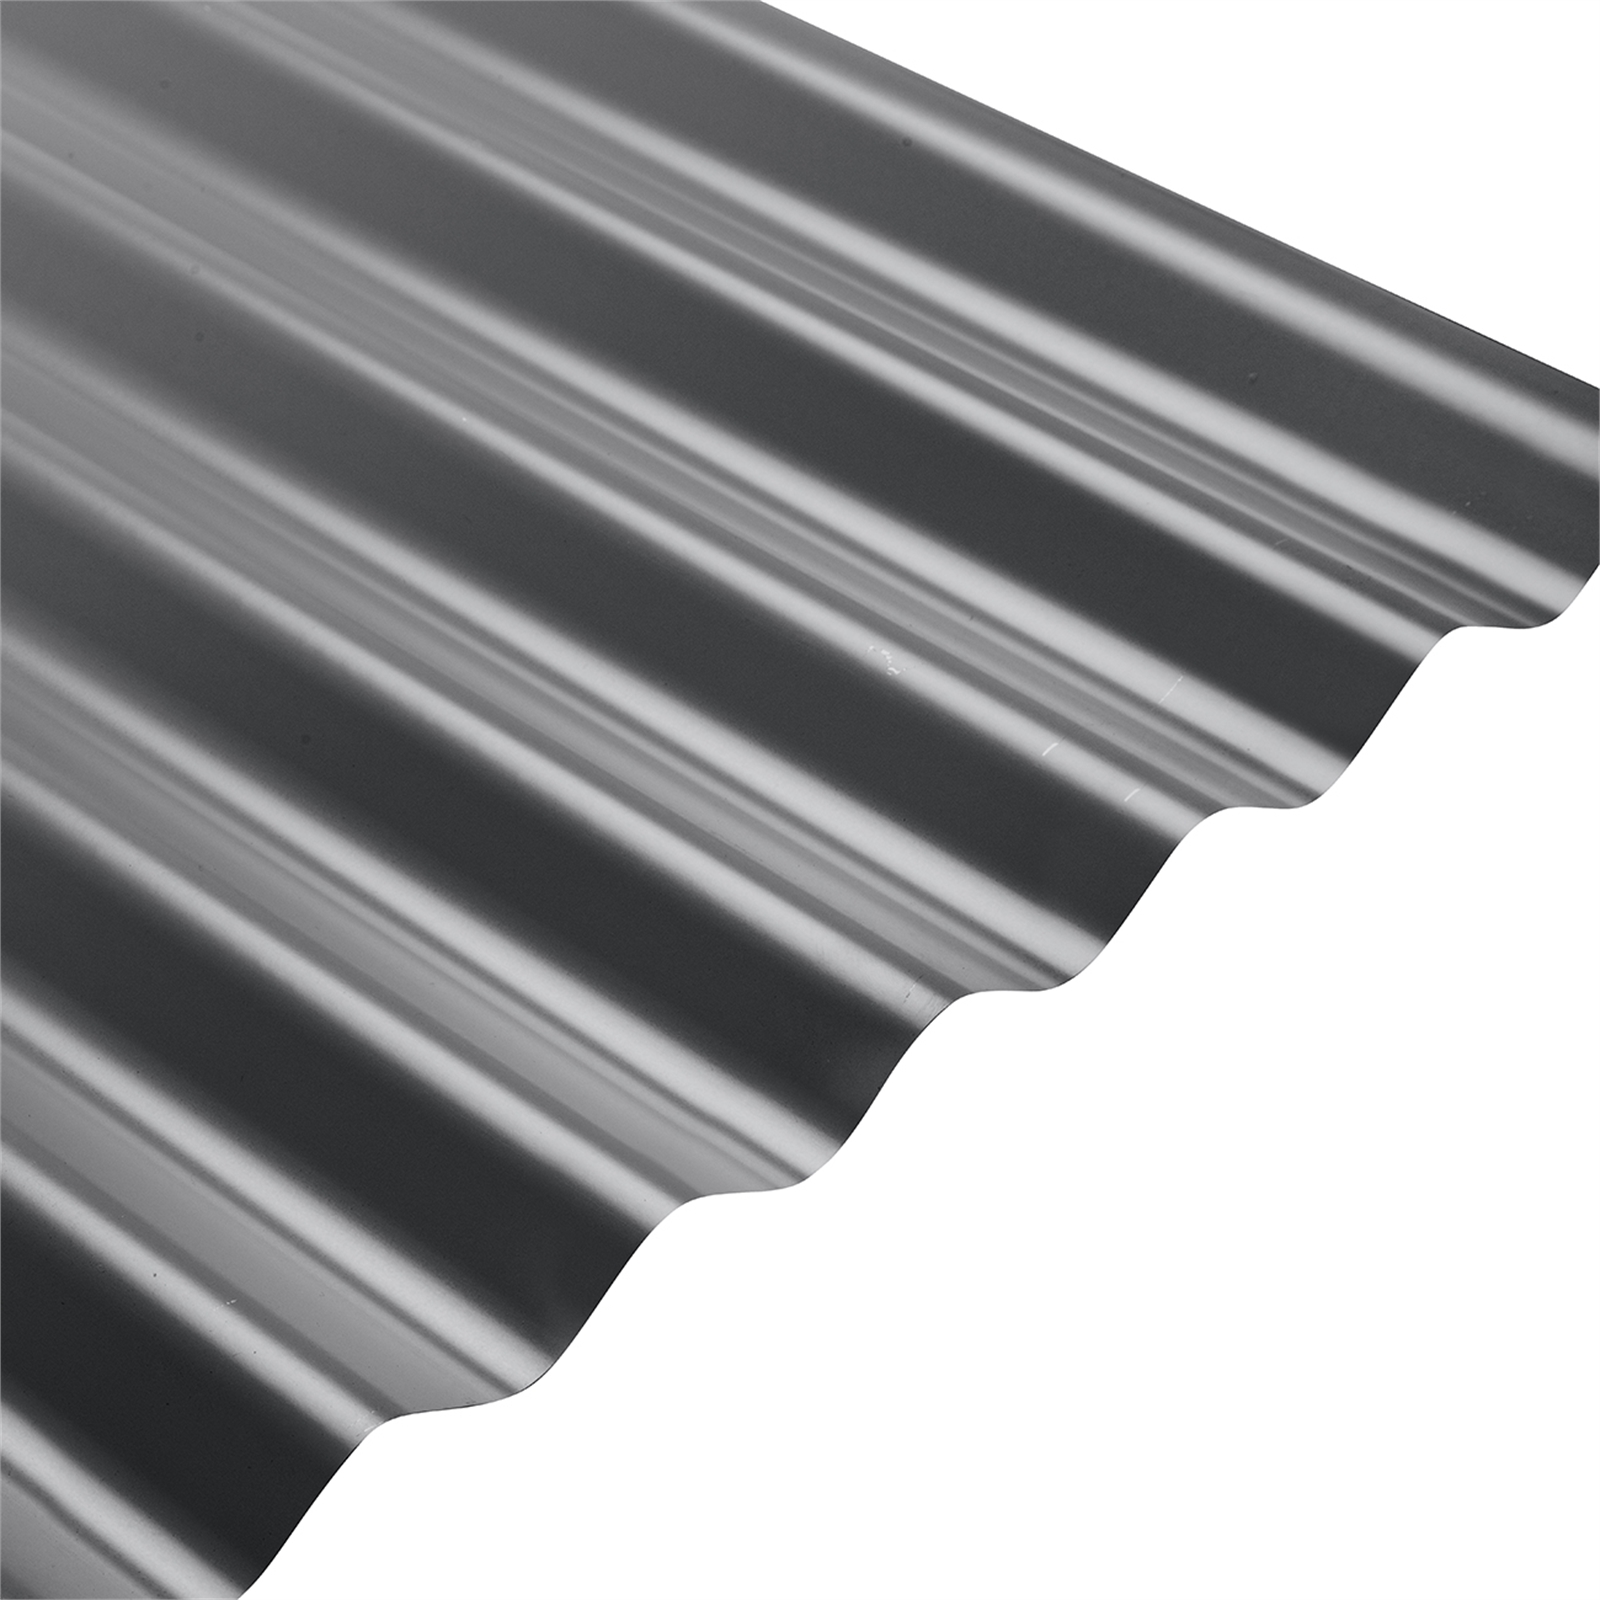 corrugated steel roofing